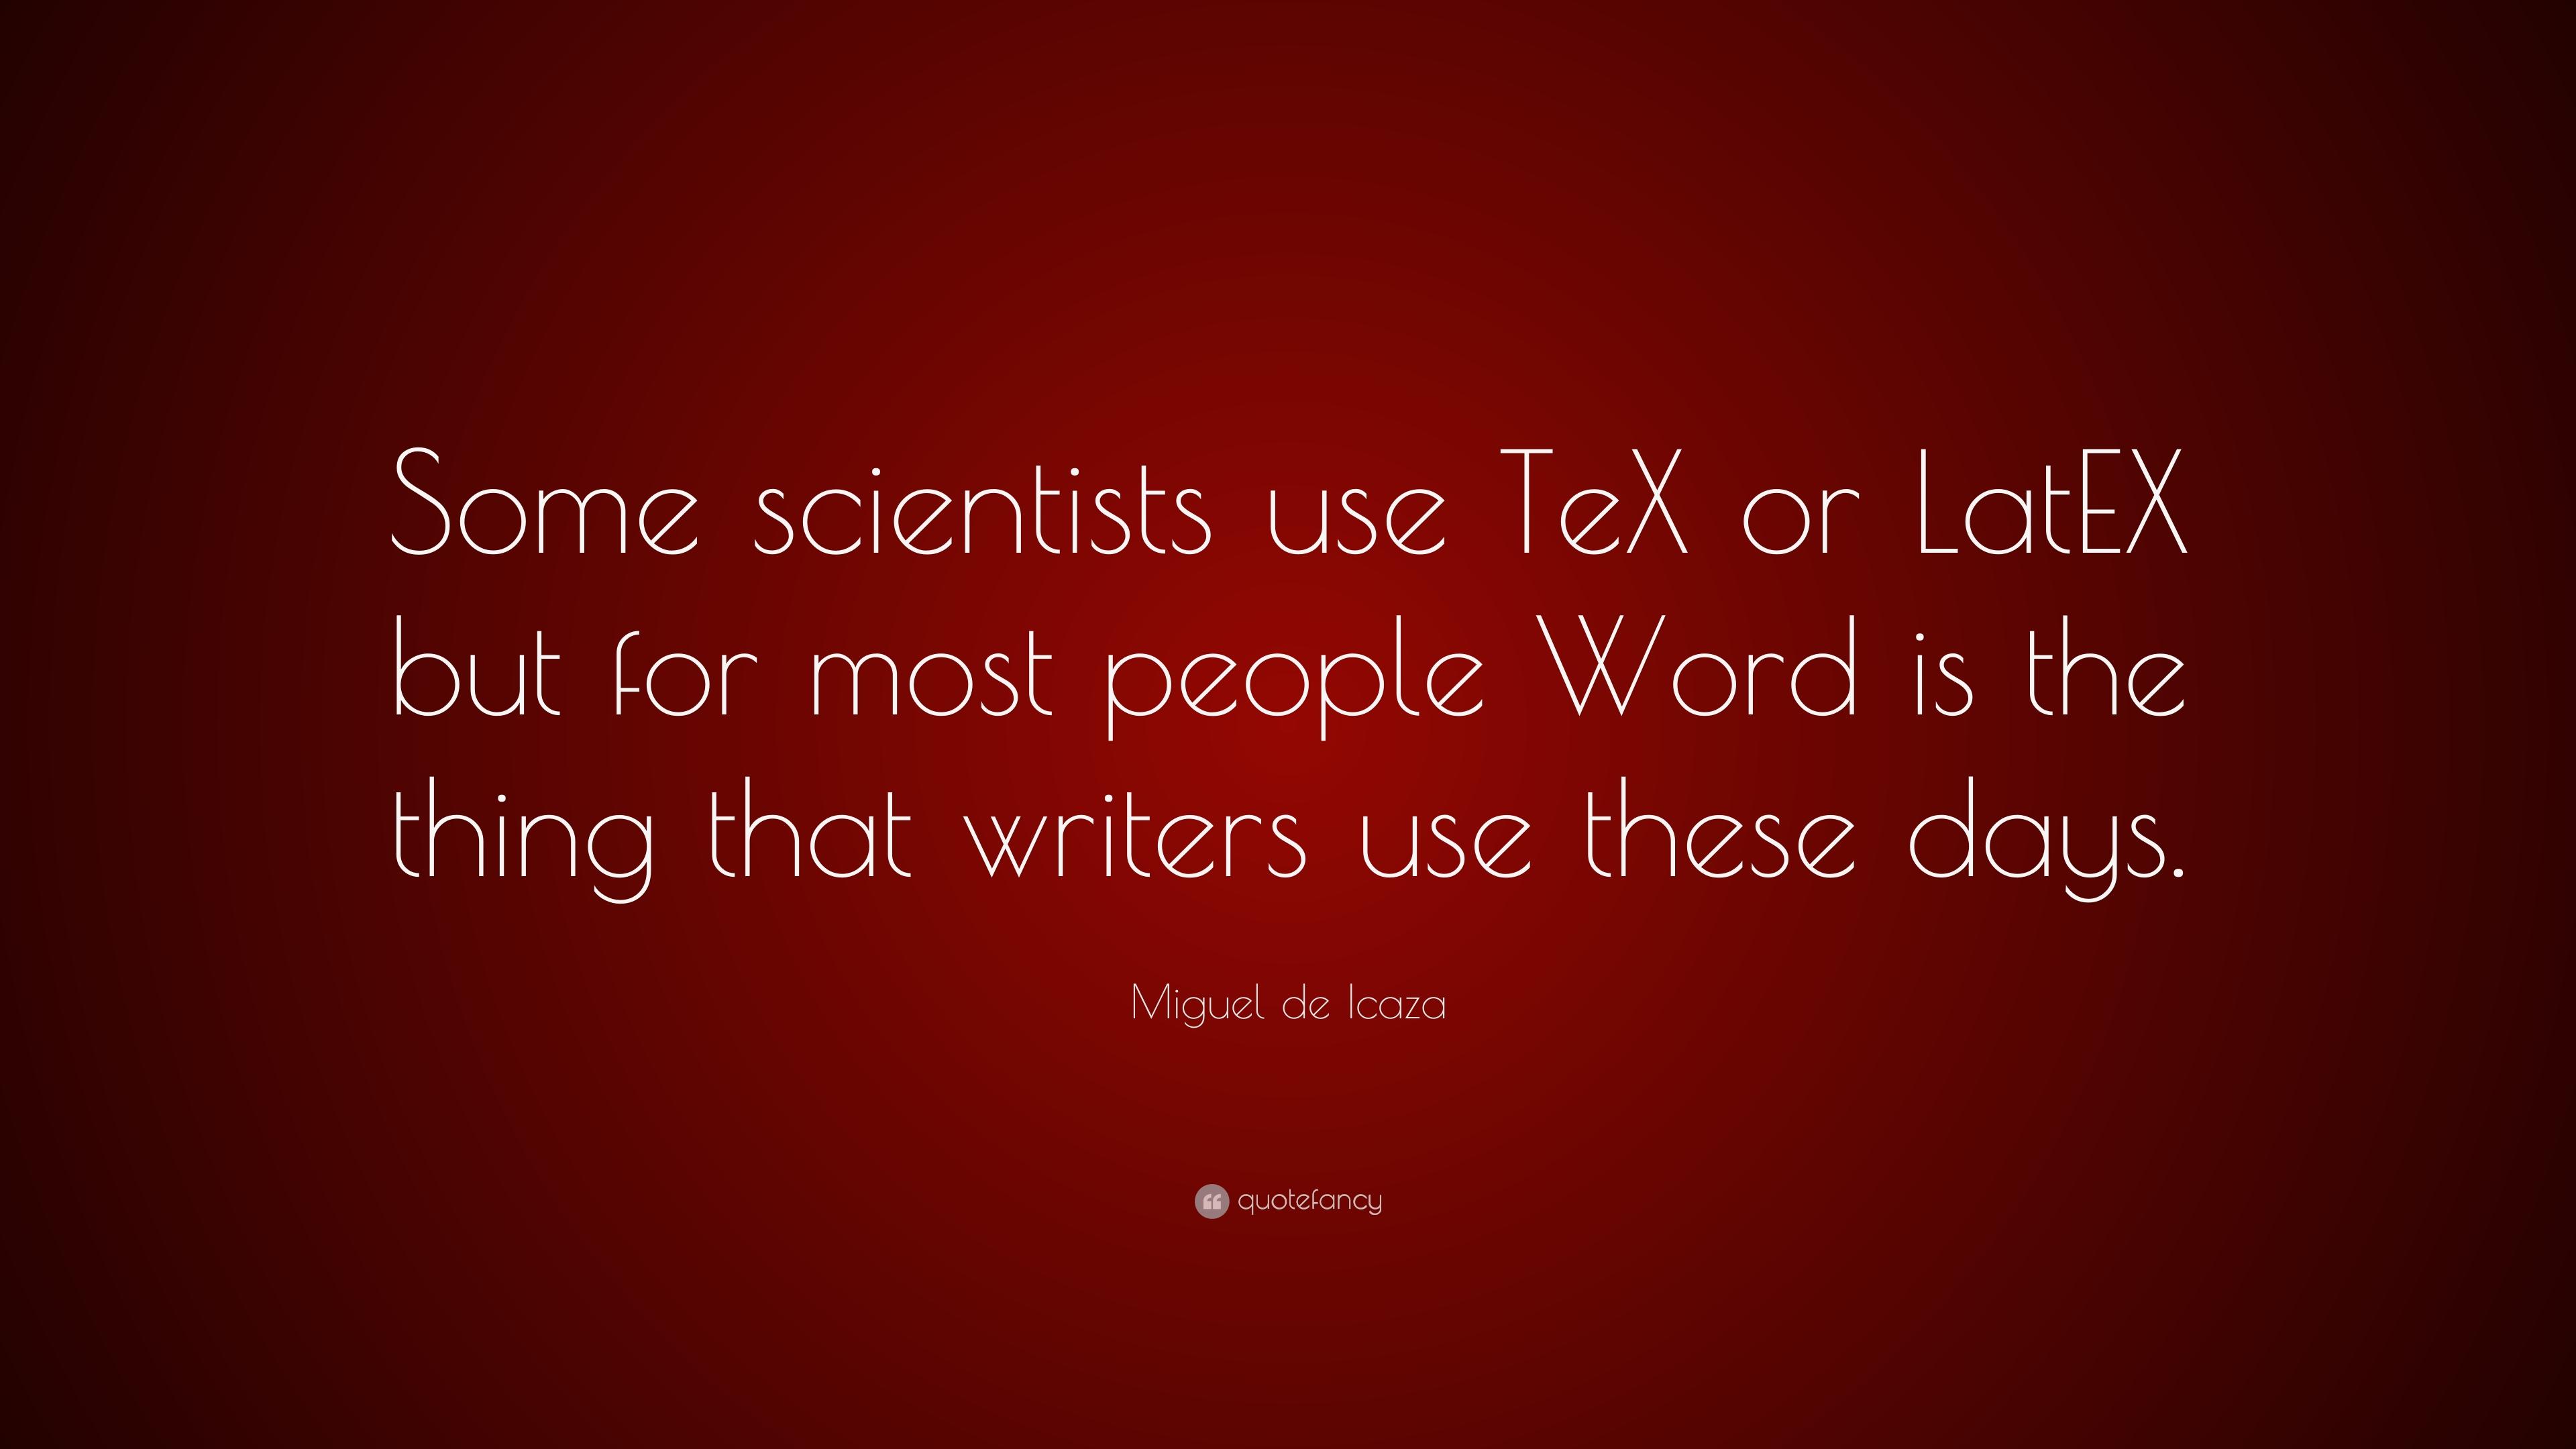 Miguel de Icaza Quote: “Some scientists use TeX or LatEX but